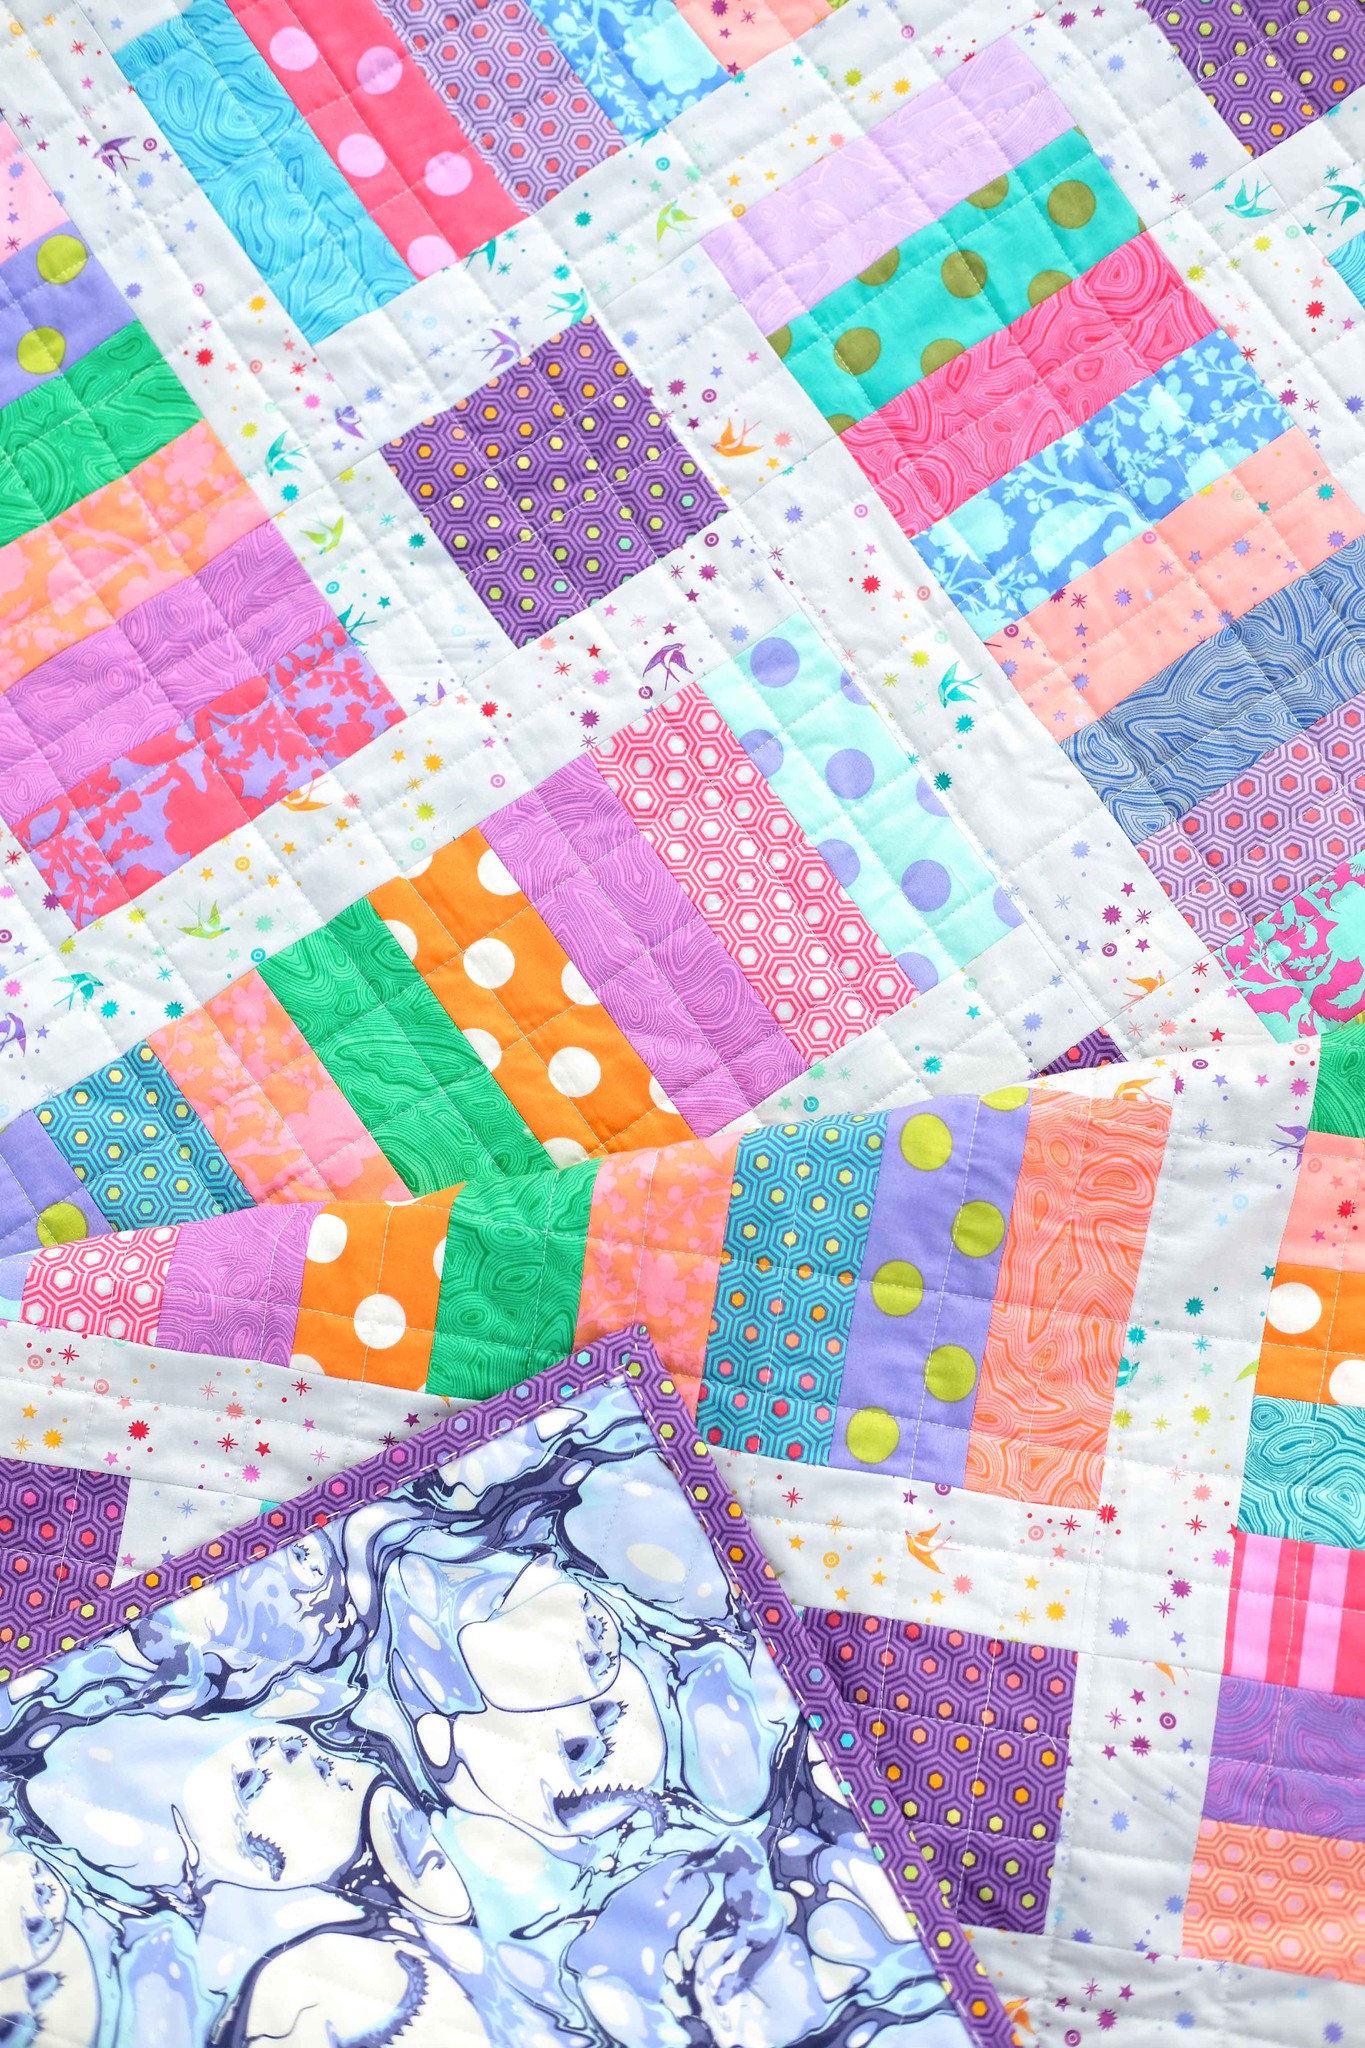 The Iris Quilt in Tula Pink - Kitchen Table Quilting